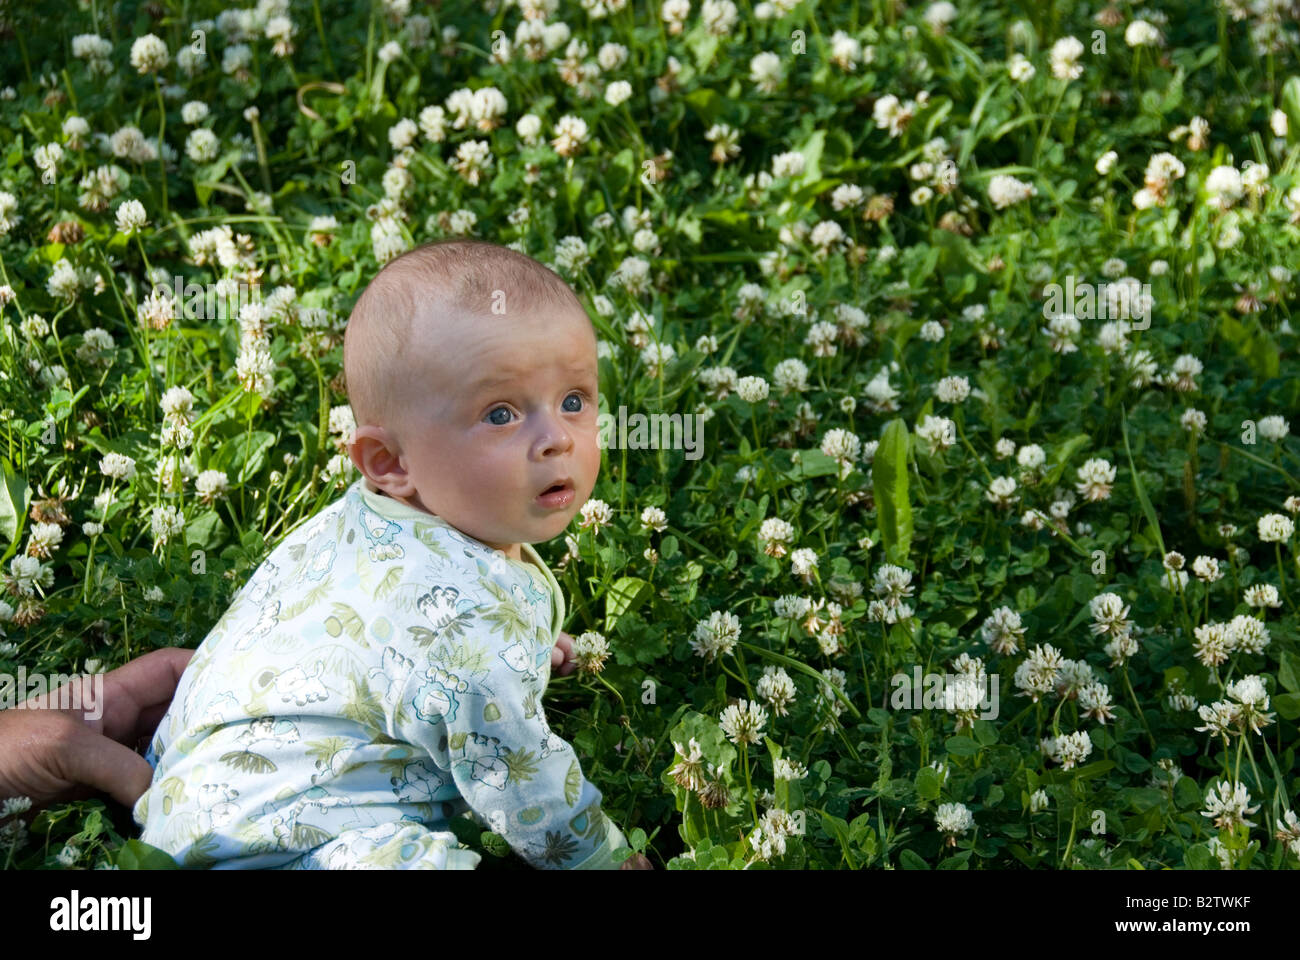 Baby Boy Joshua Kailas Hudson Aged 15 Weeks Practicing Sitting in a Field of Green Clover with White Flowers Stock Photo